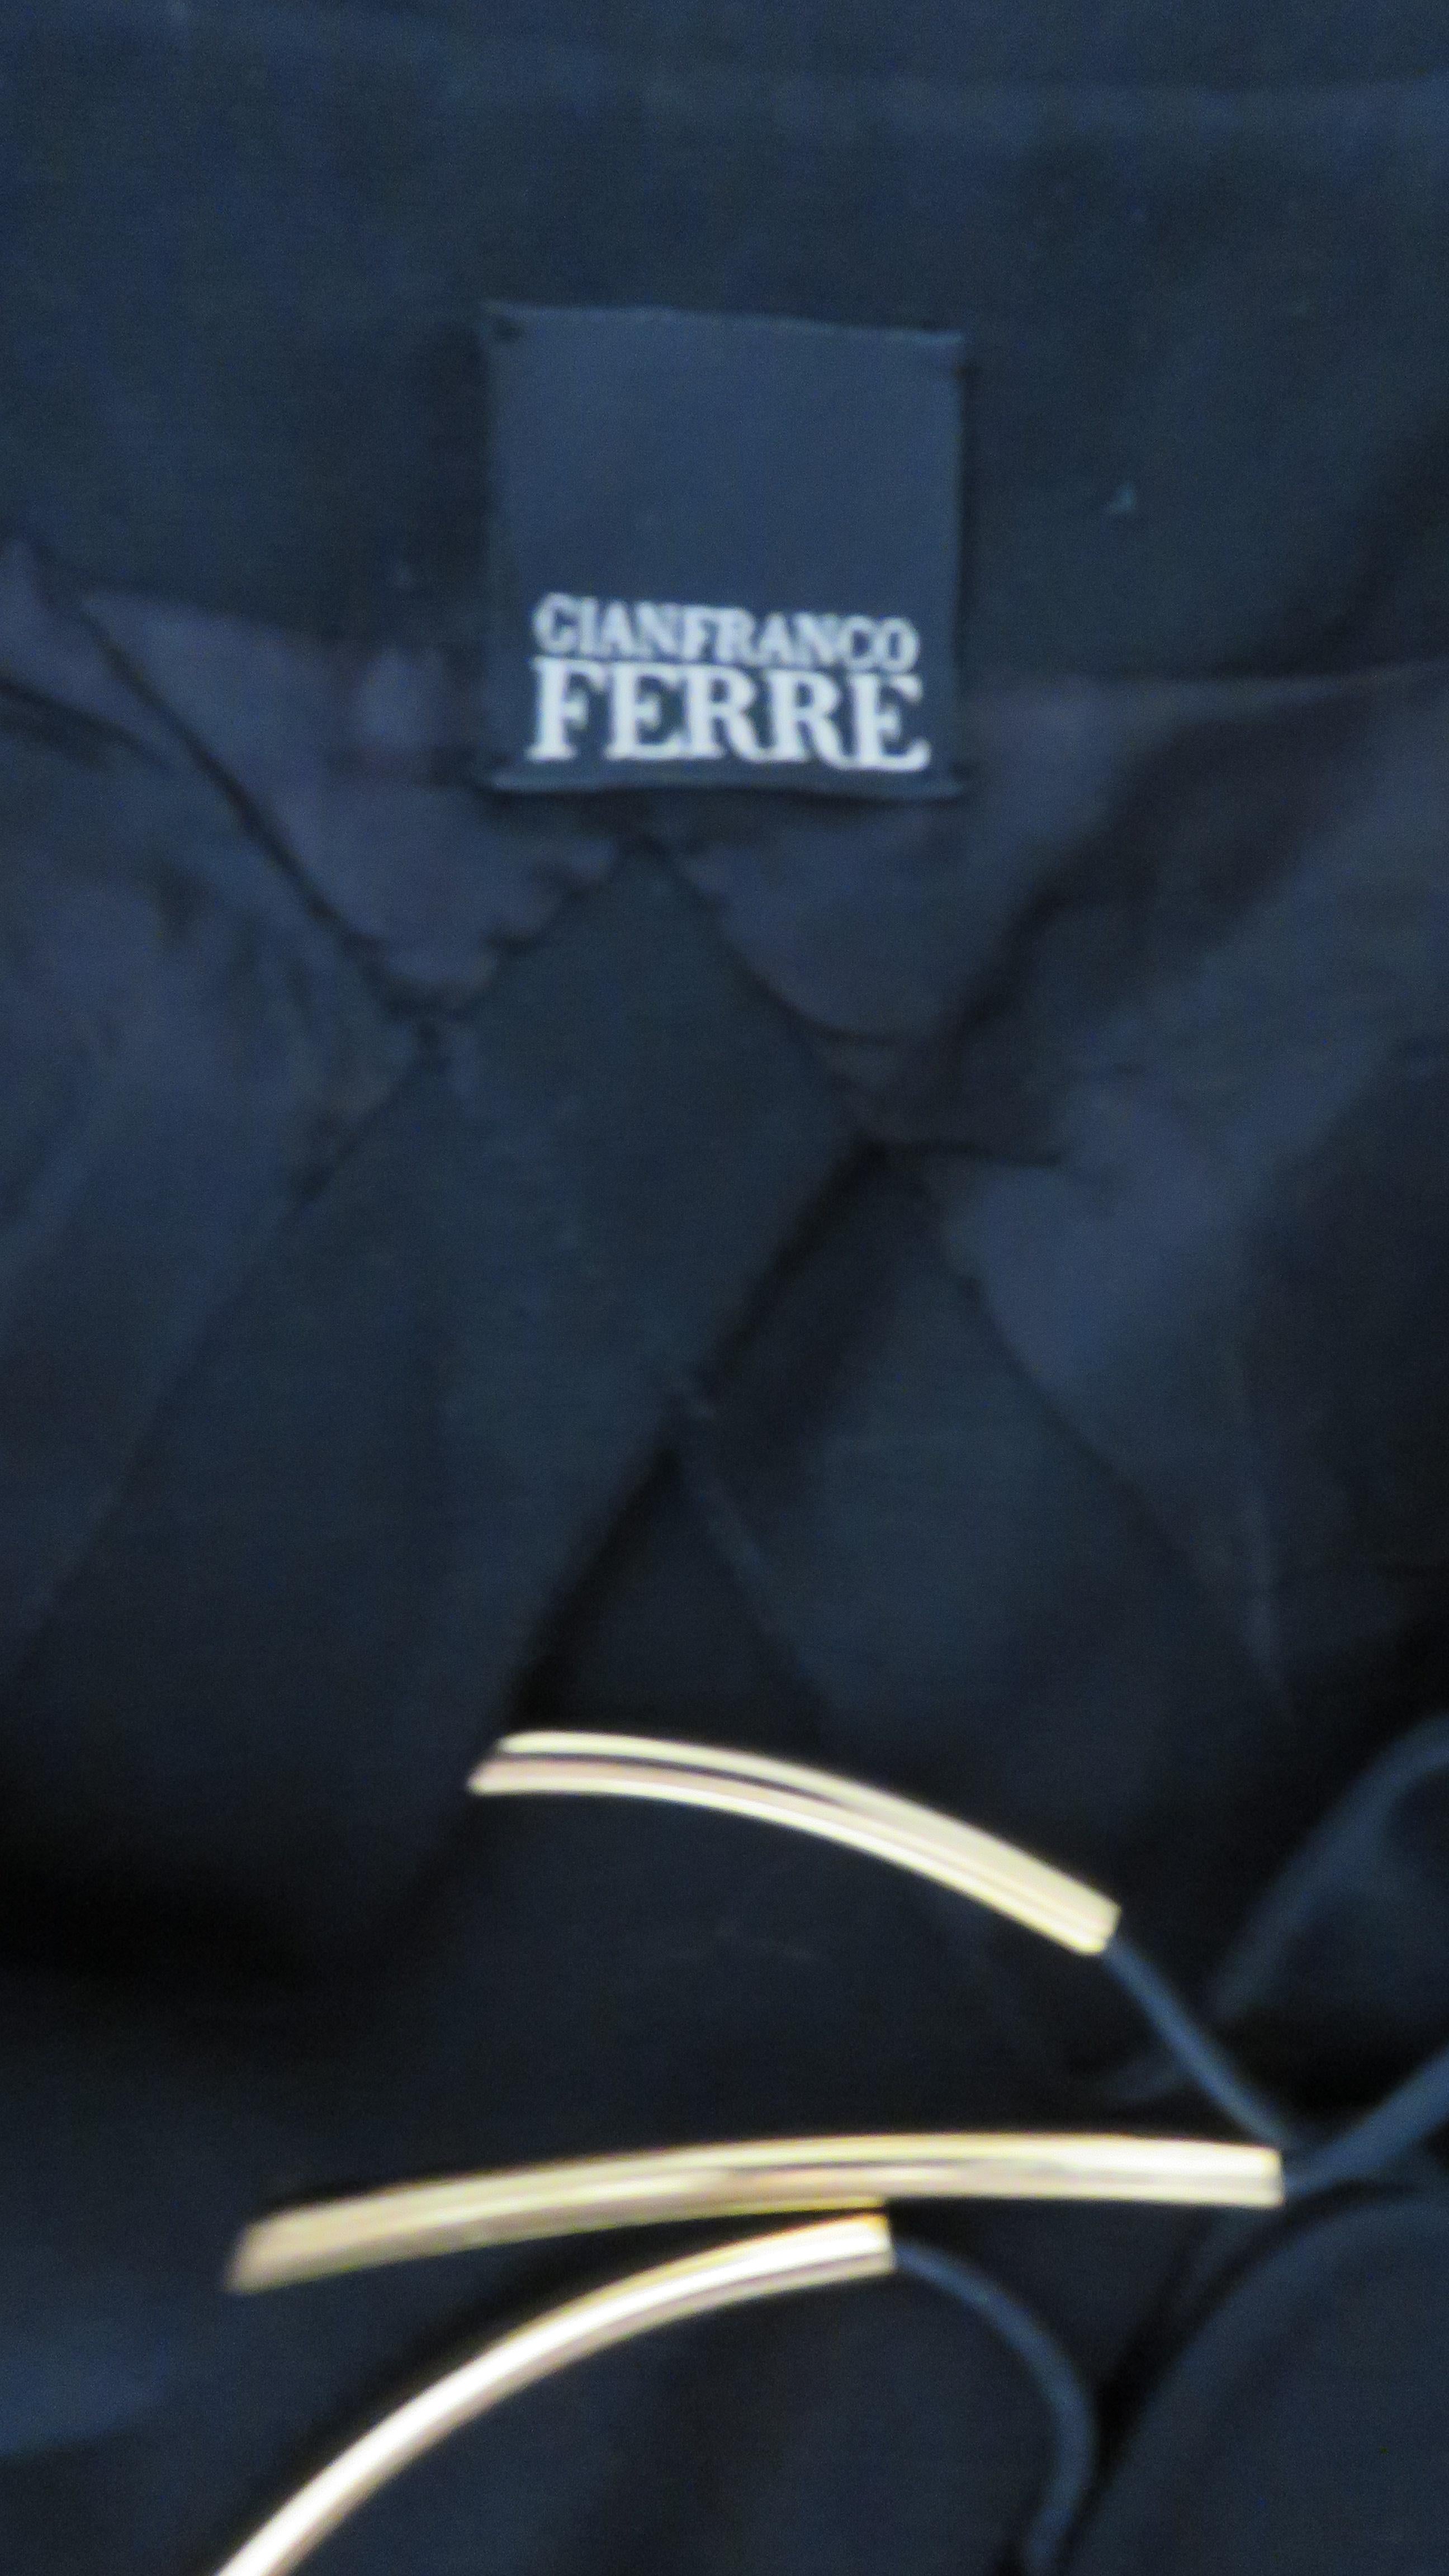 Gianfranco Ferre Skirt Suit with Cut out Jacket 9